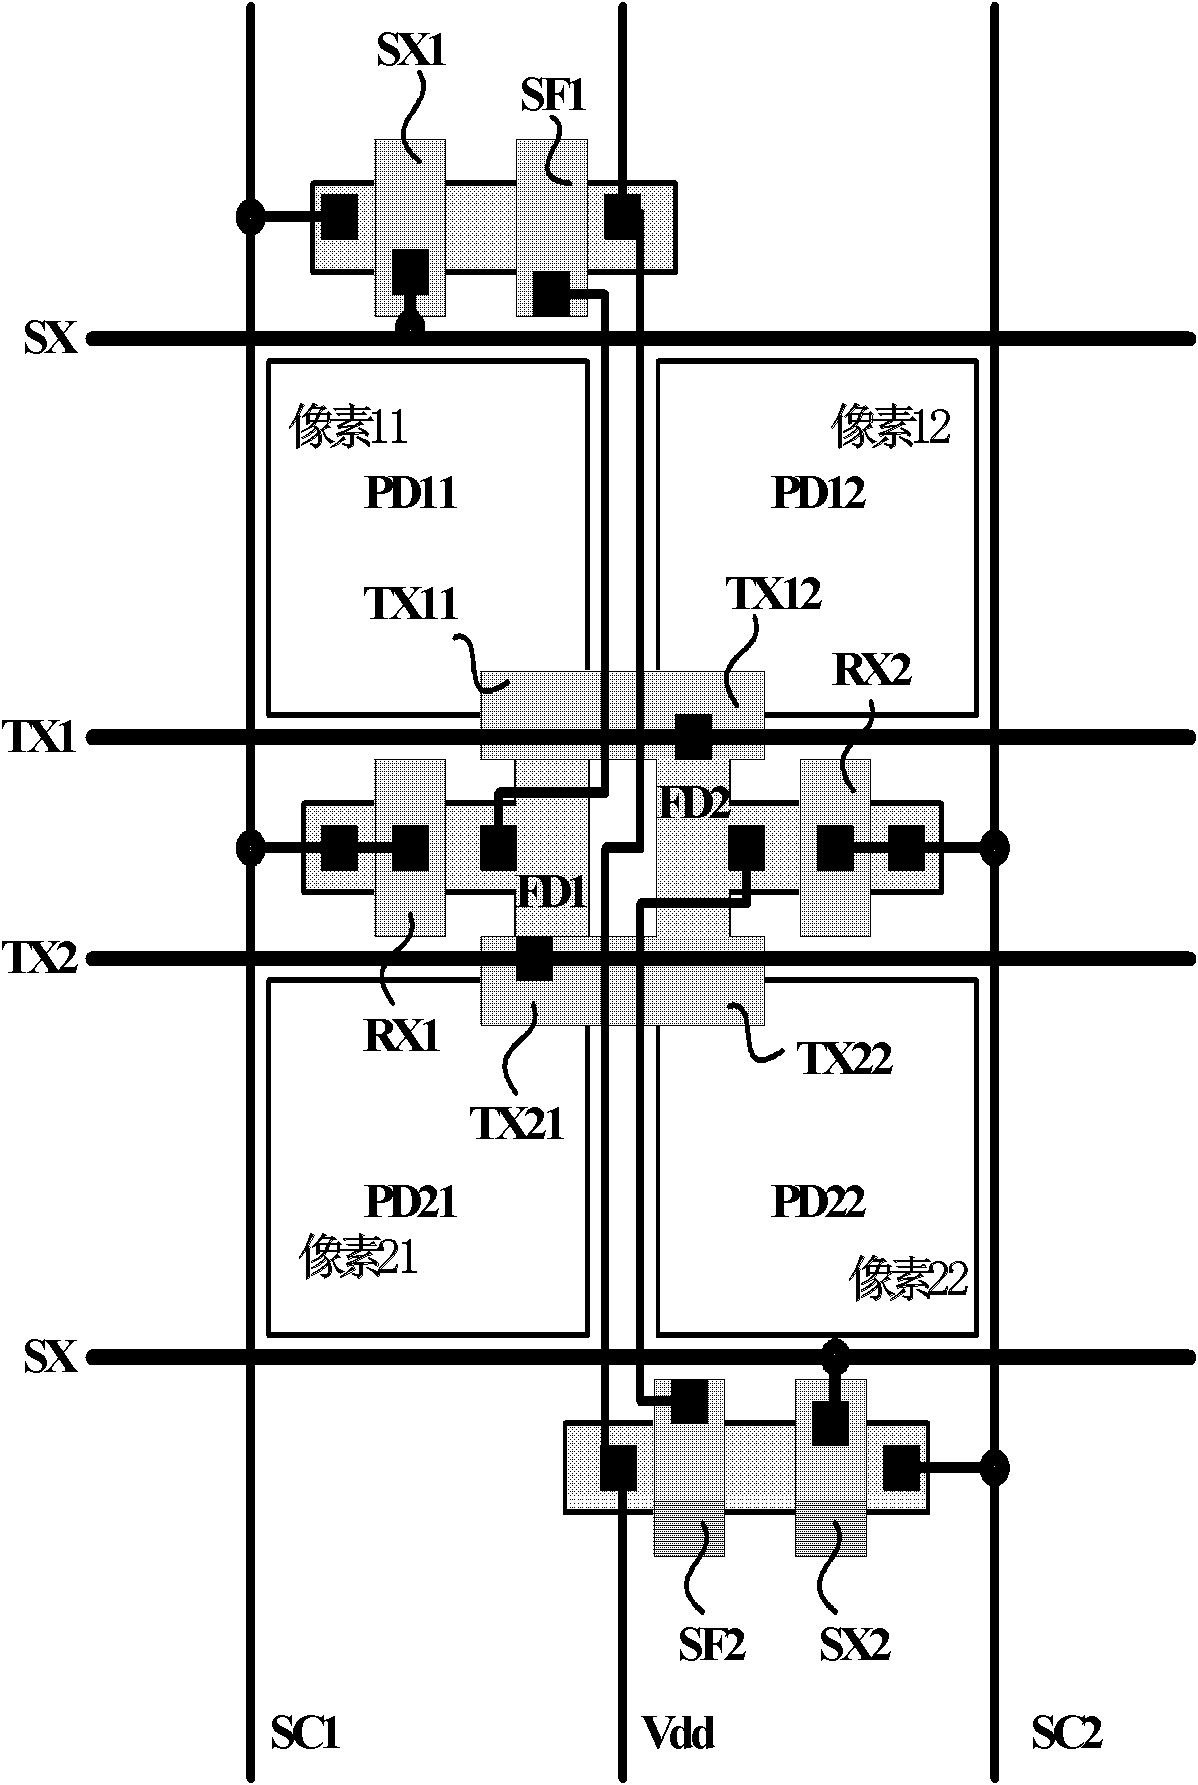 CMOS (Complementary Metal Oxide Semiconductor) image sensor pixel and control time sequence thereof